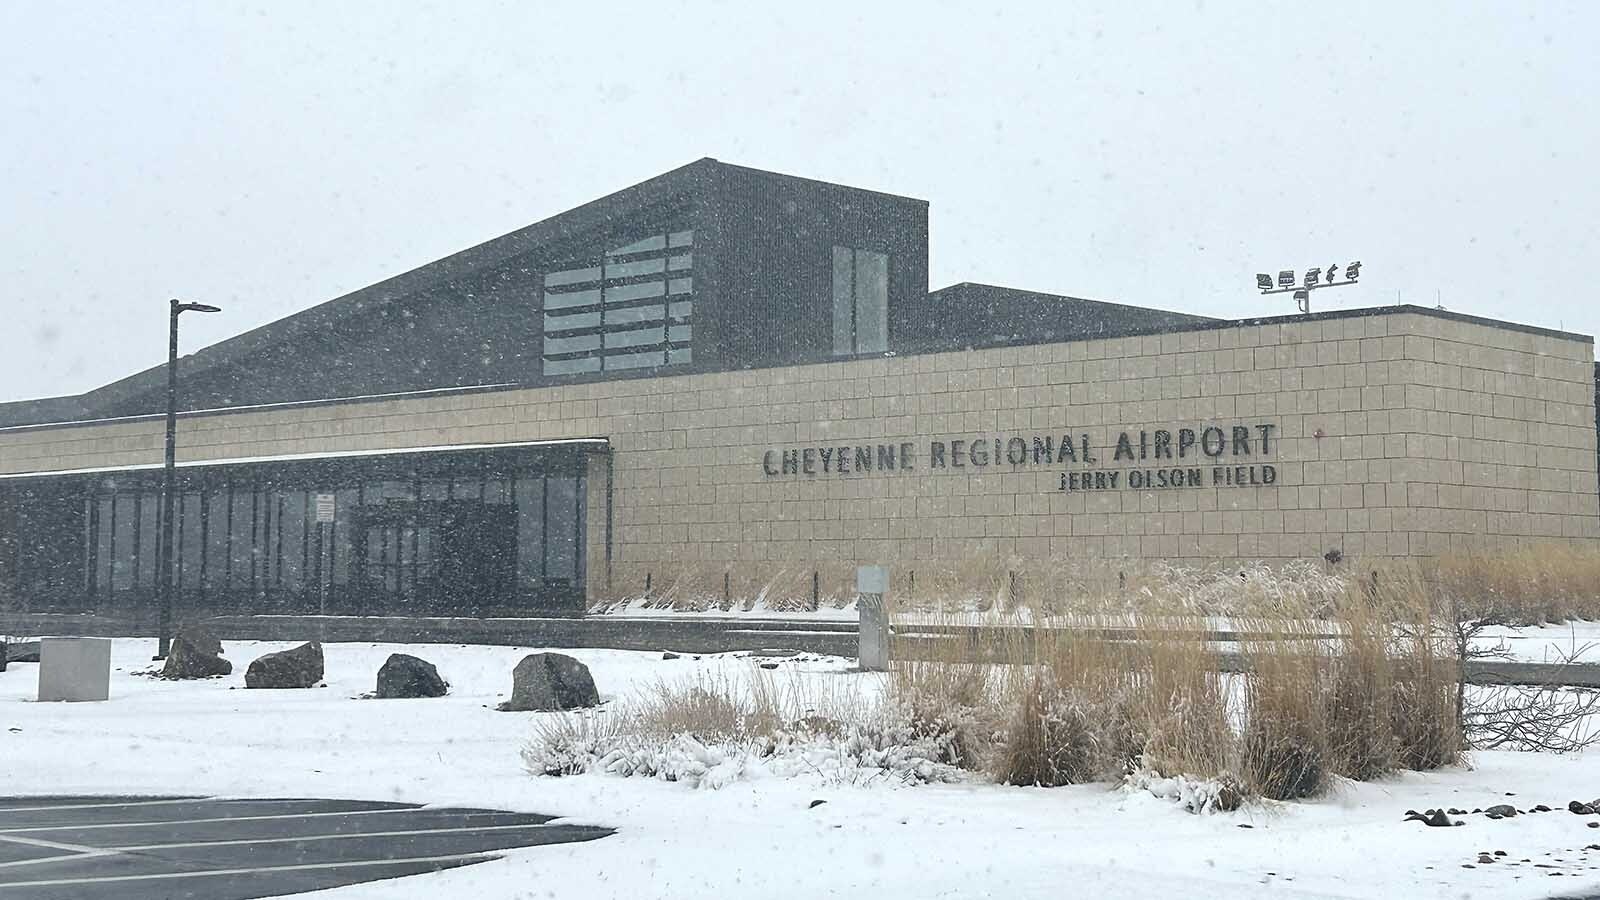 Snow falls from an overcast sky at Cheyenne Regional Airport on Thursday.